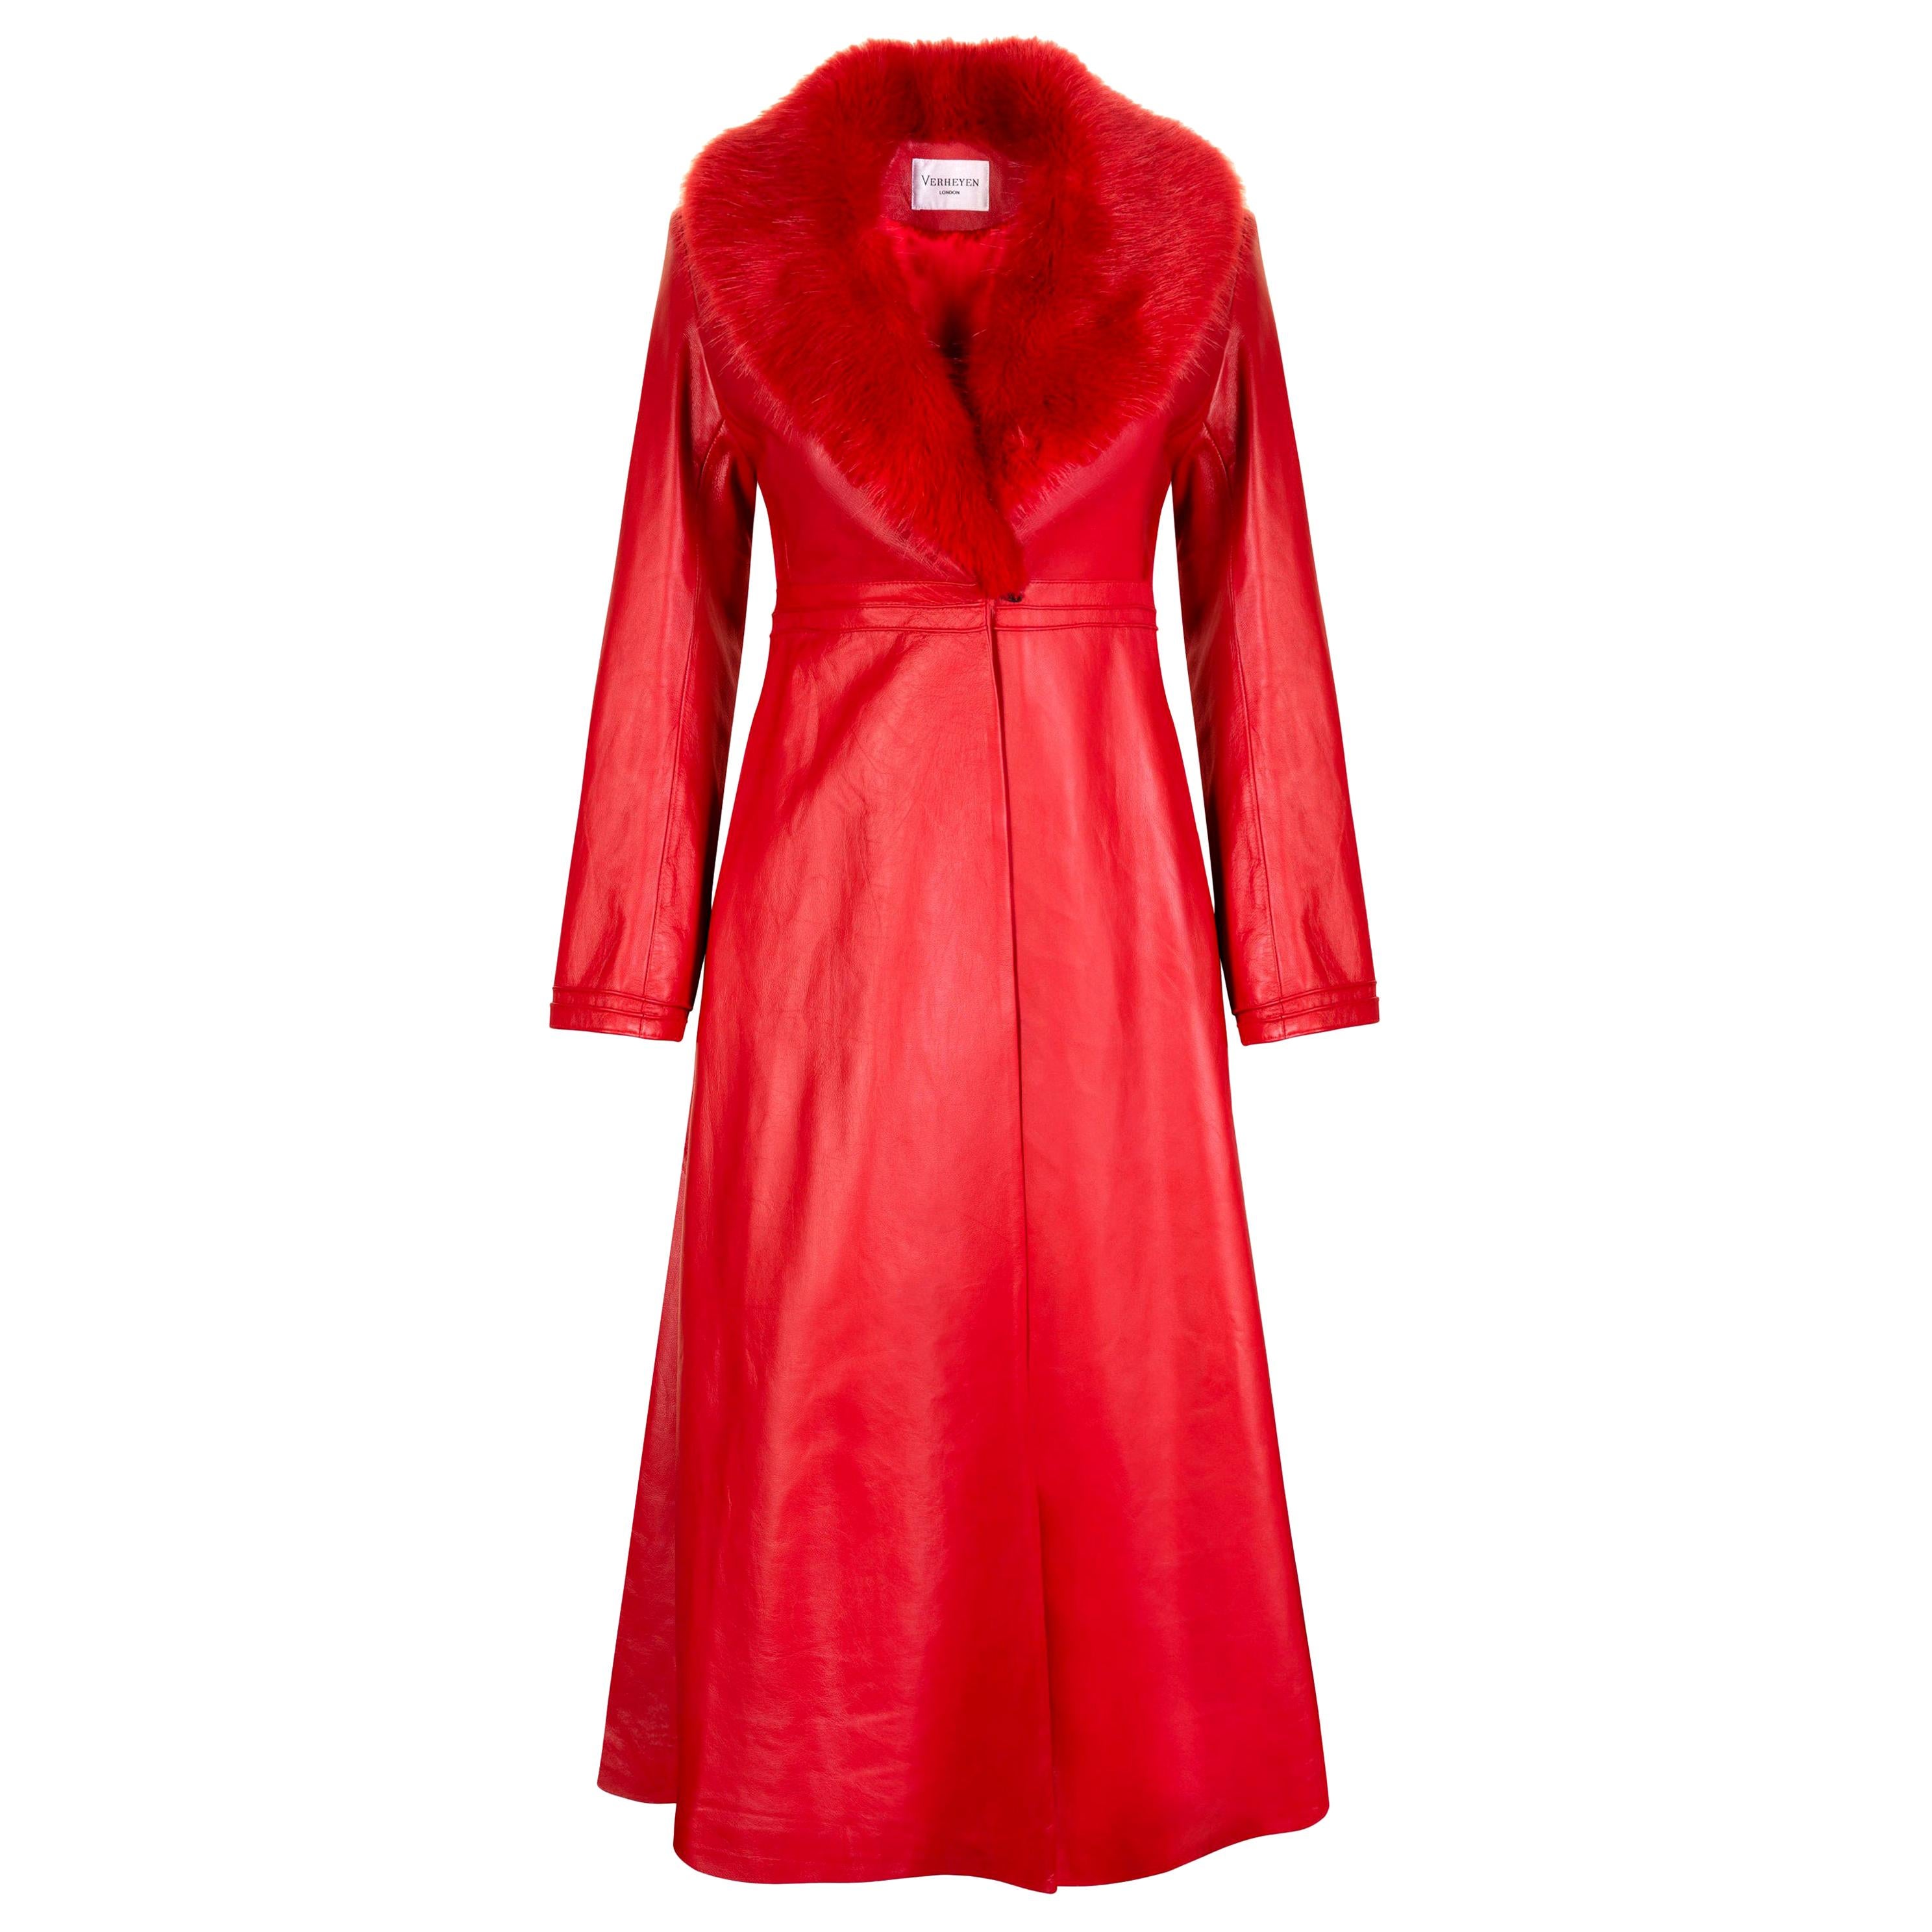 Verheyen London Edward Leather Coat with Faux Fur Collar in Red - Size uk 12 For Sale